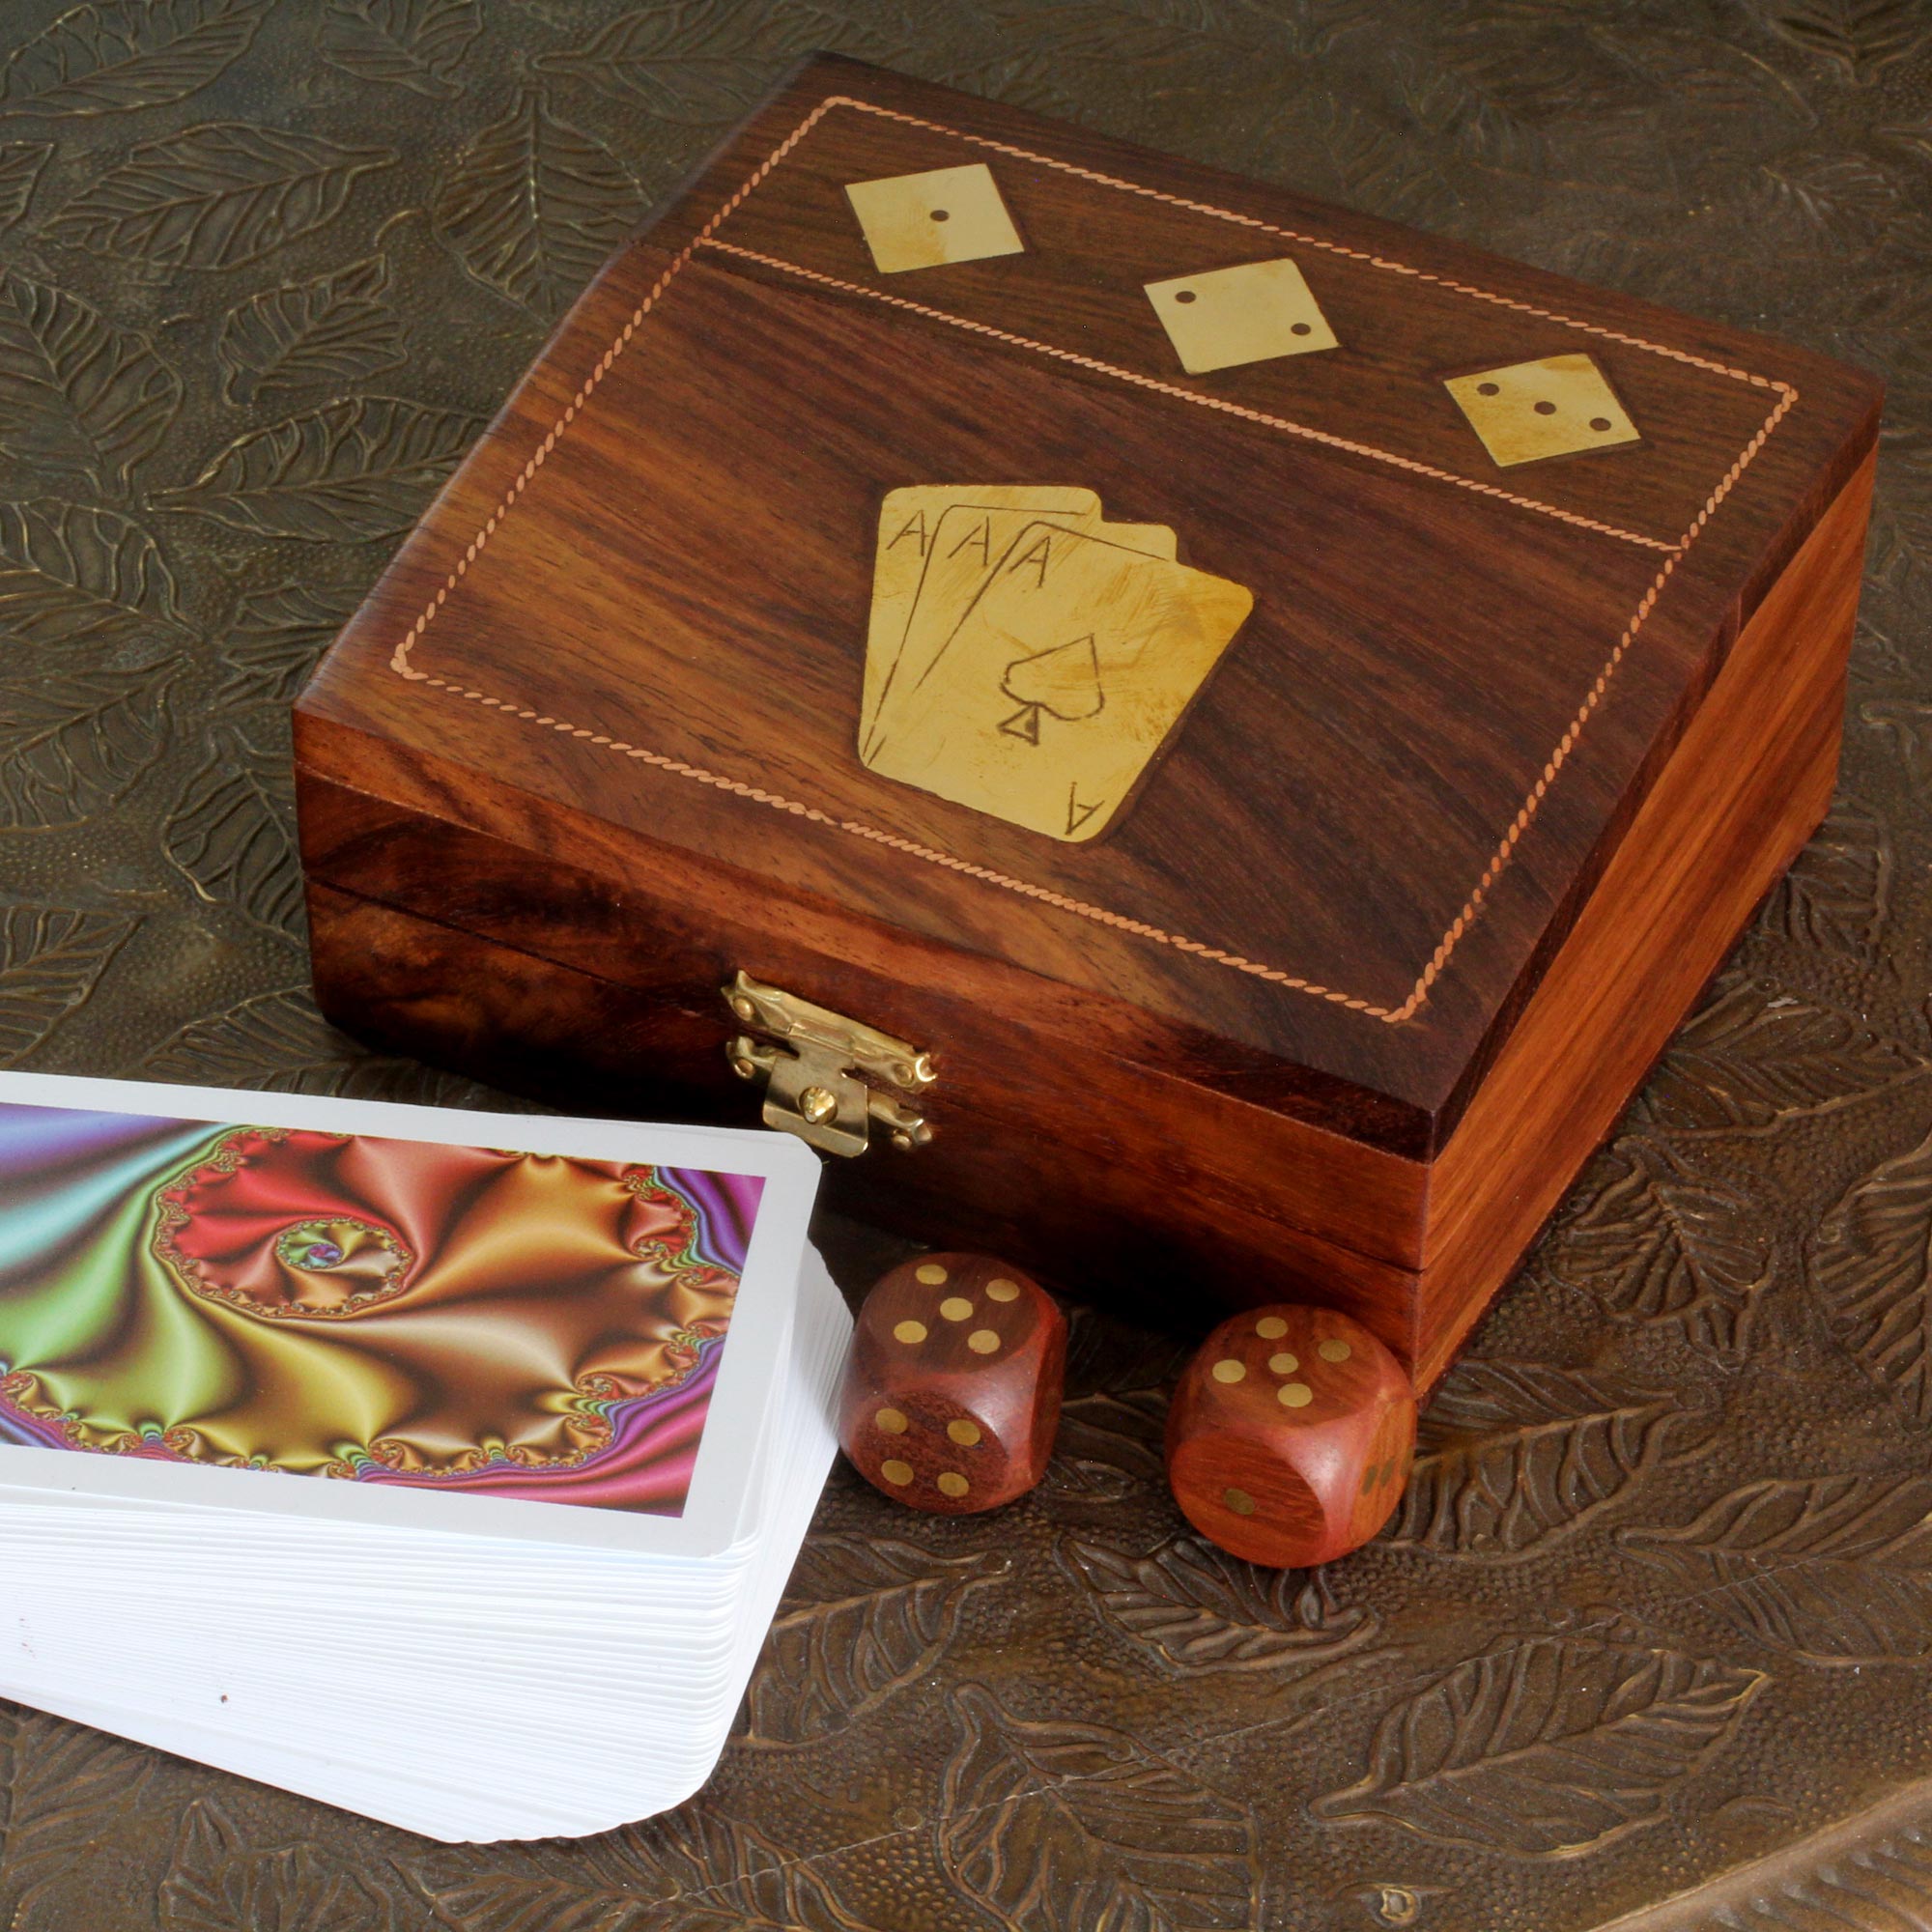 Hand Carved Wood Box and Game Set Cards Dice Art NOVICA Fair Trade